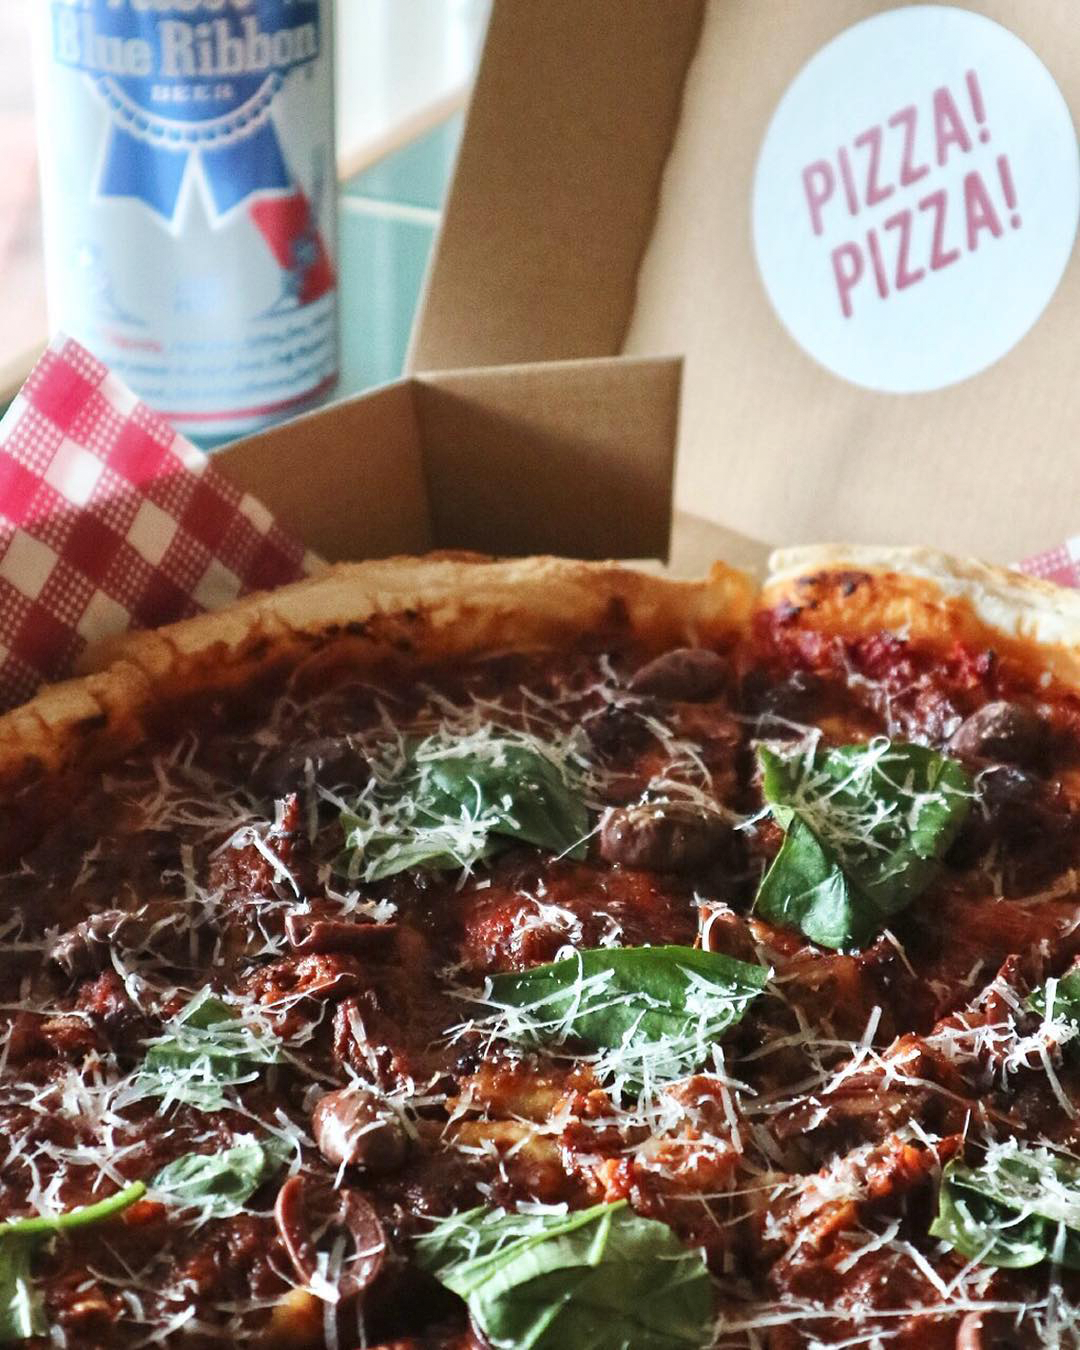 A takeaway pizza box with meaty and cheesy topppings accompanied by a Blue Ribbon beer.